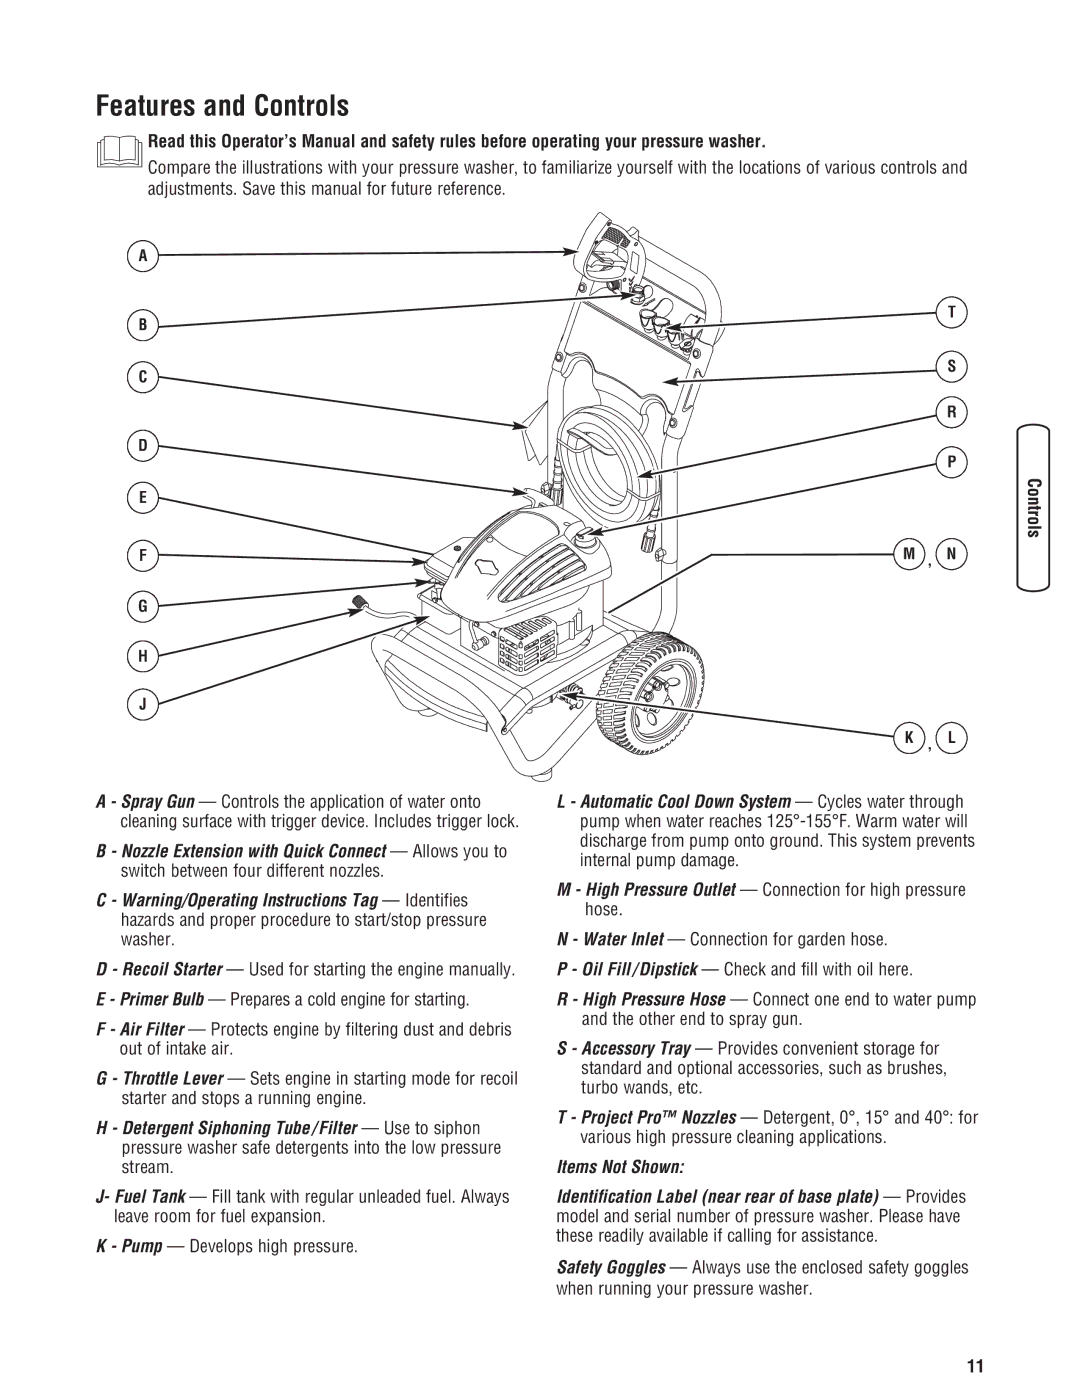 Briggs & Stratton Pressure Washer manual Features and Controls 